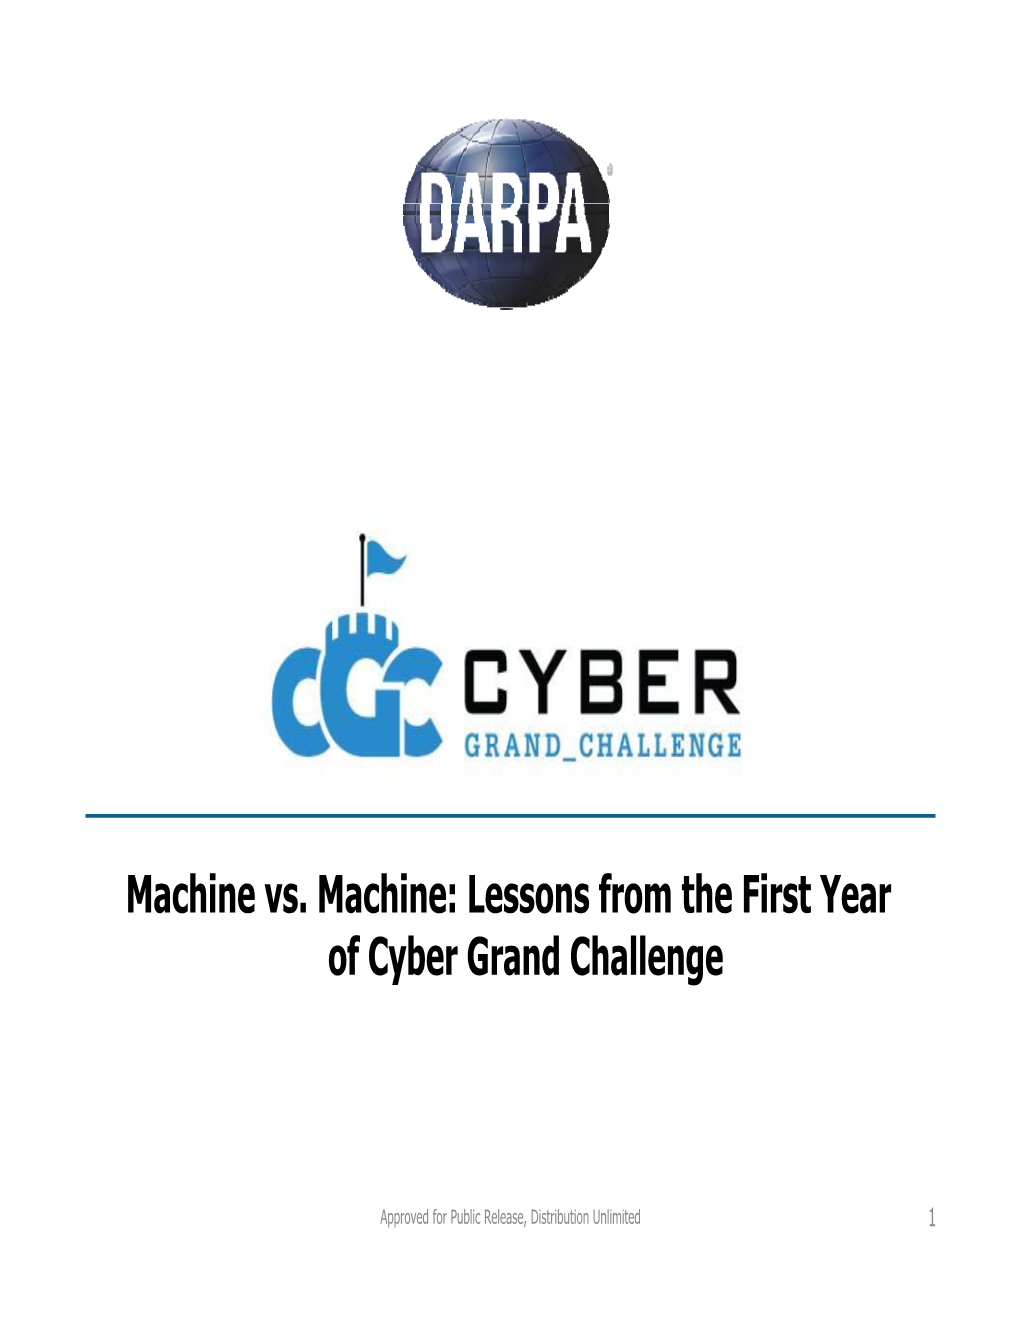 Lessons from the First Year of Cyber Grand Challenge